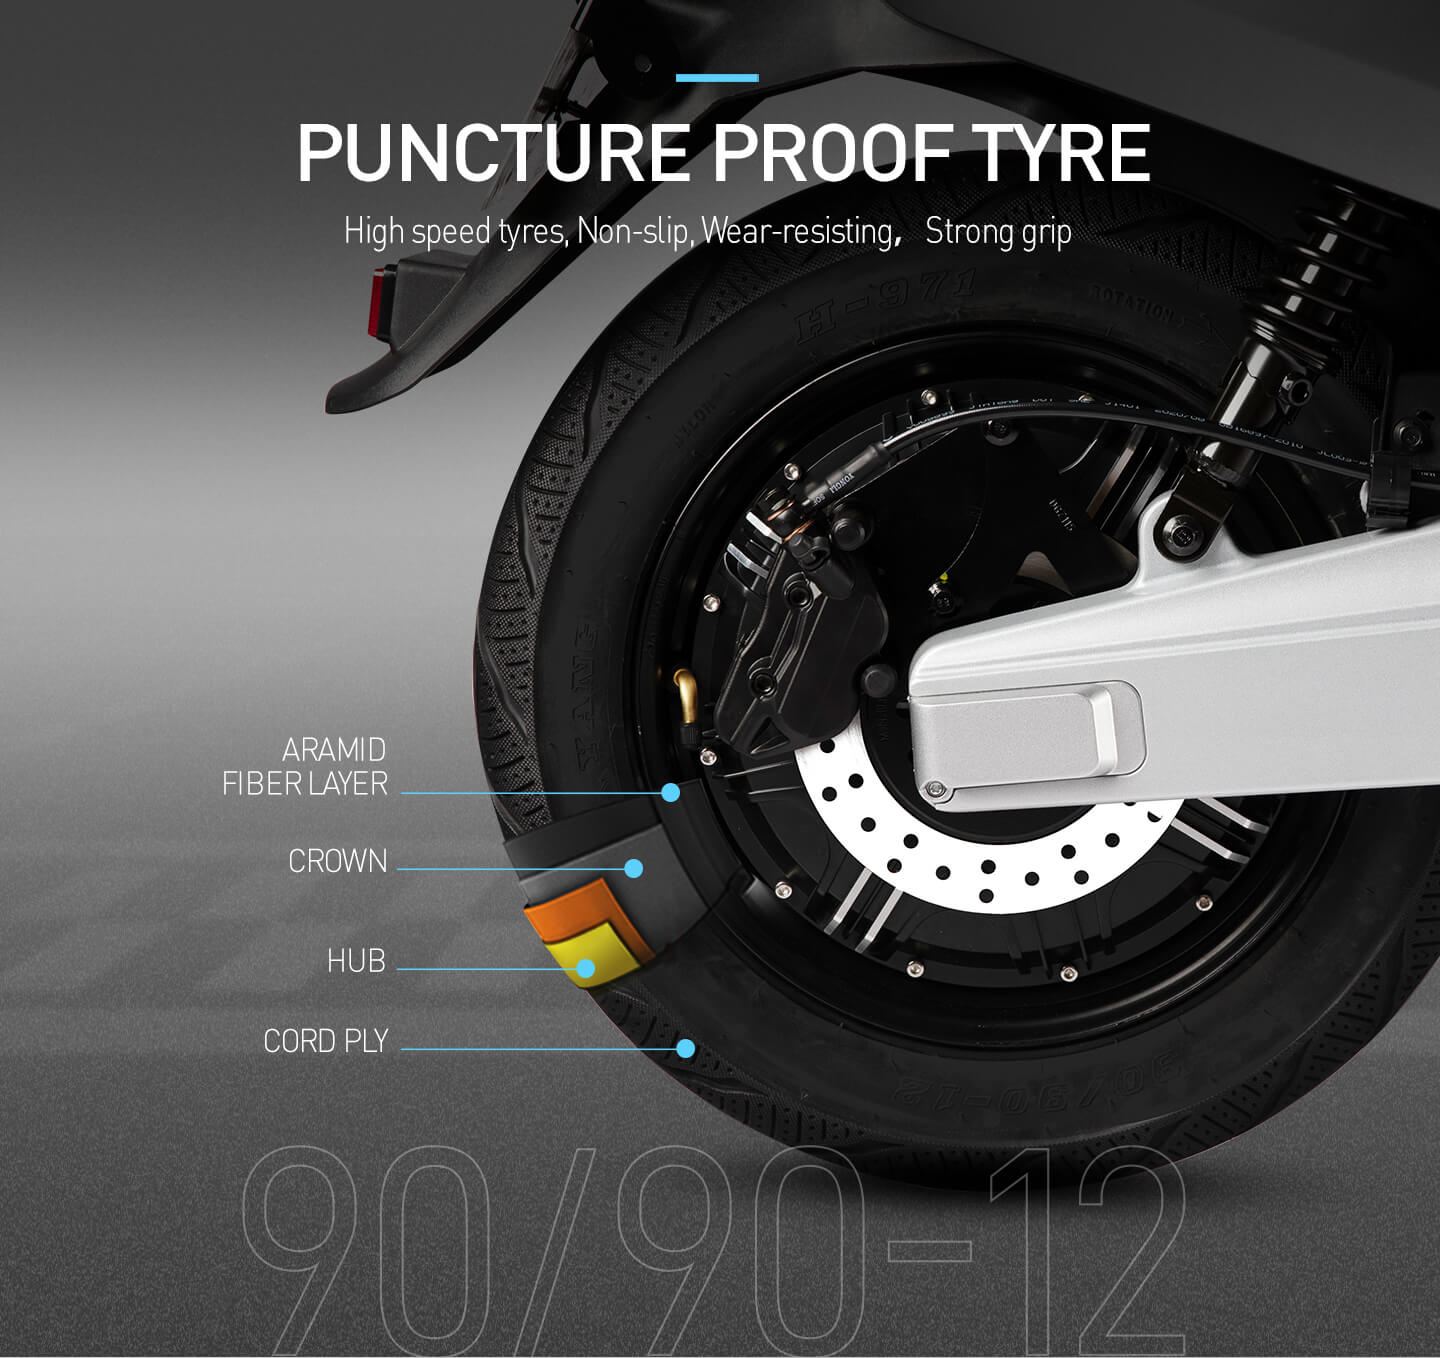 PUNCTURE PROOF TYRE-lvneng